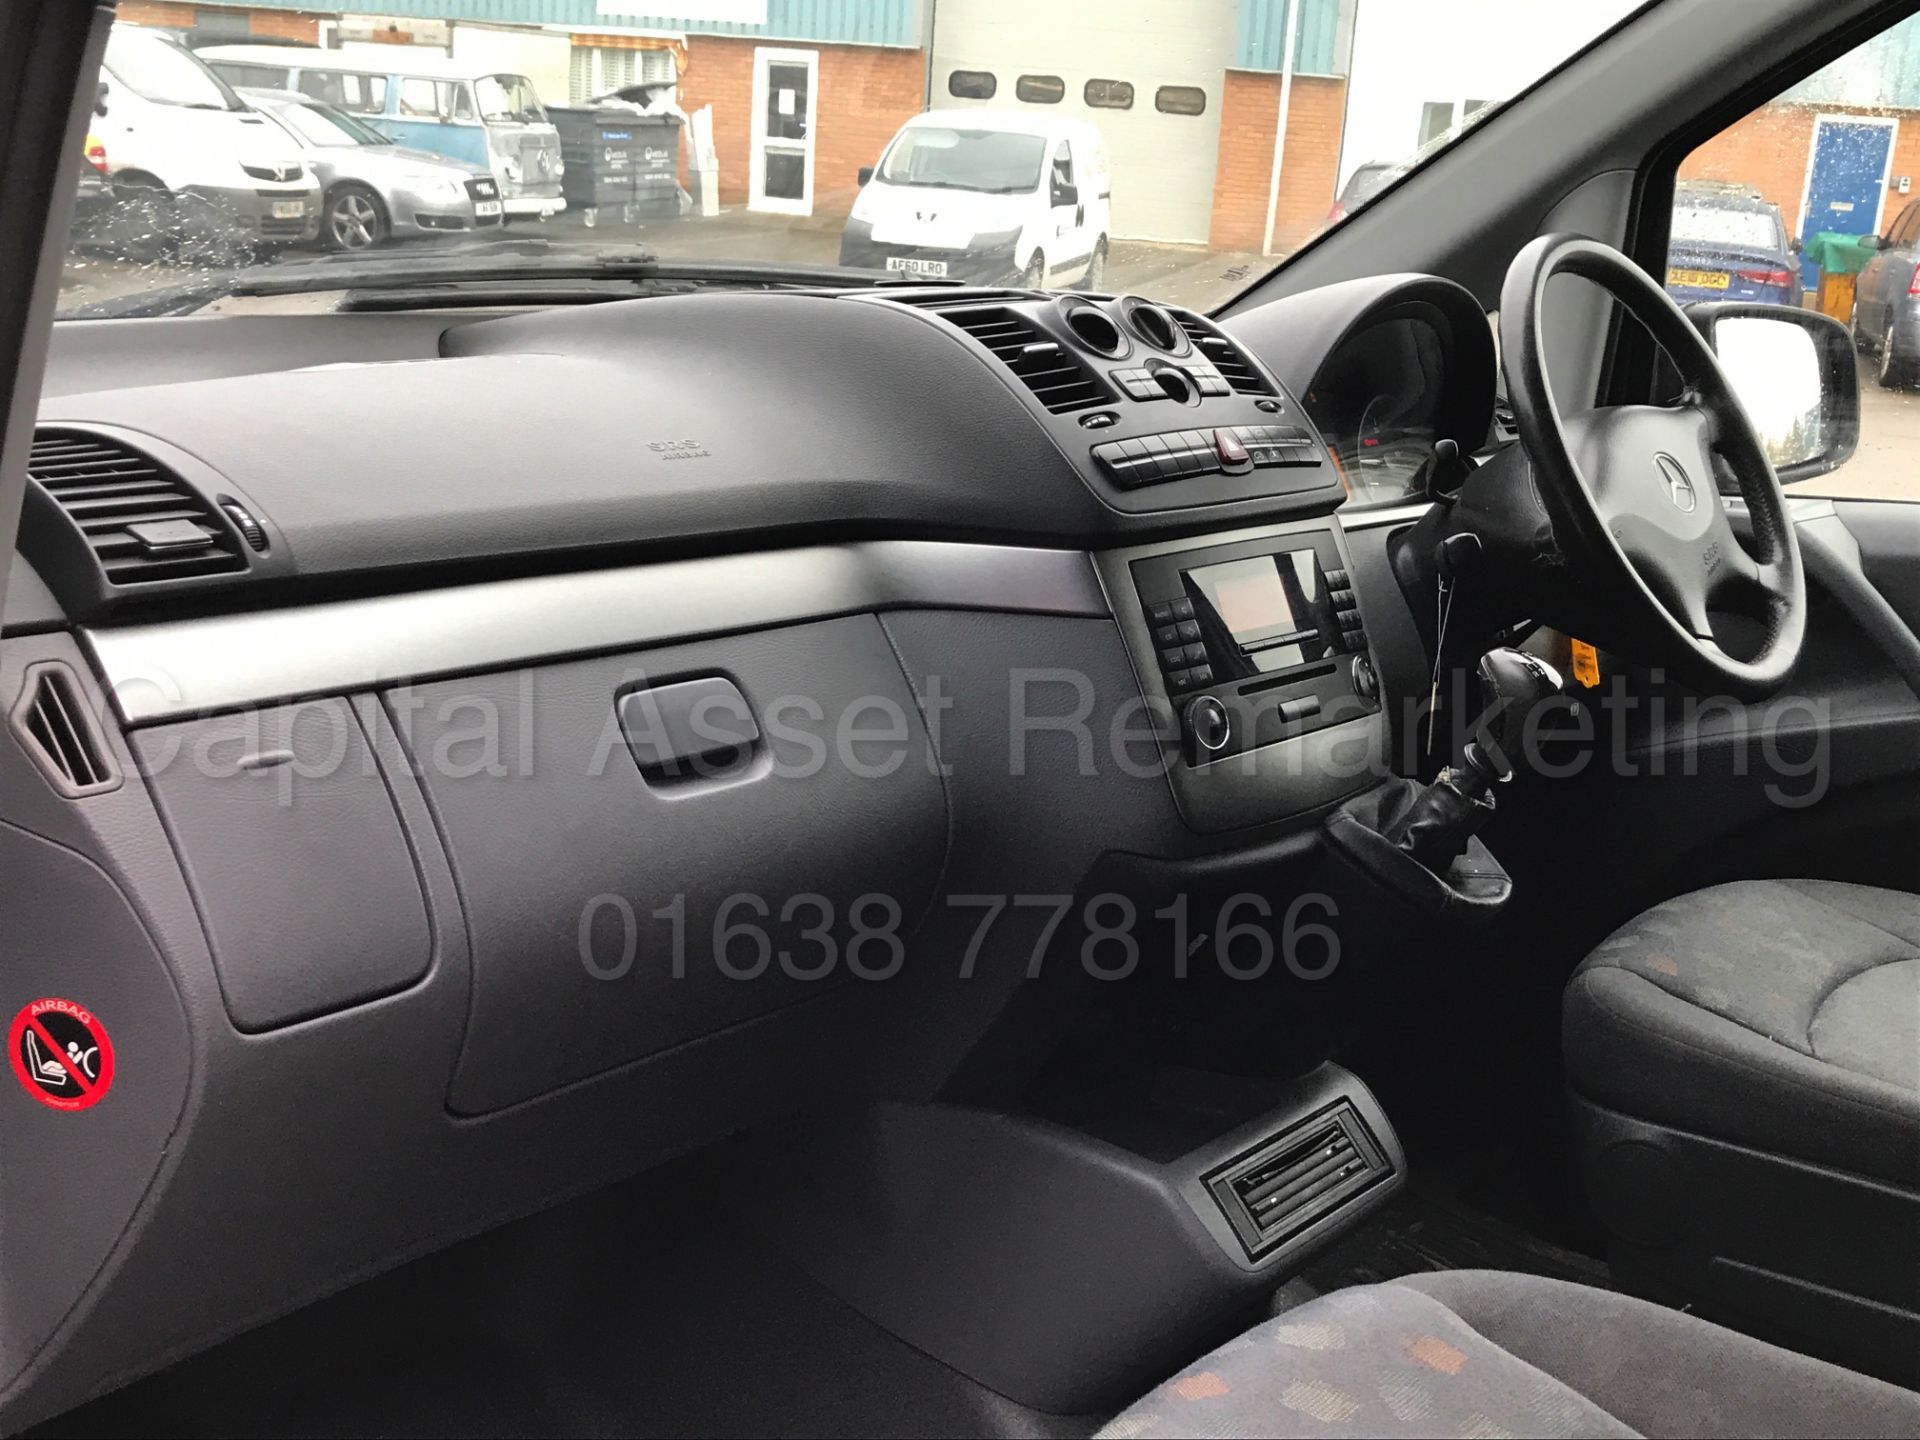 MERCEDES VITO *SPORT* '5 SEATER DUELINER' (2010 - 10 REG) '2.1 CDI - 150 BHP - 6 SPEED' **AIR CON** - Image 17 of 35